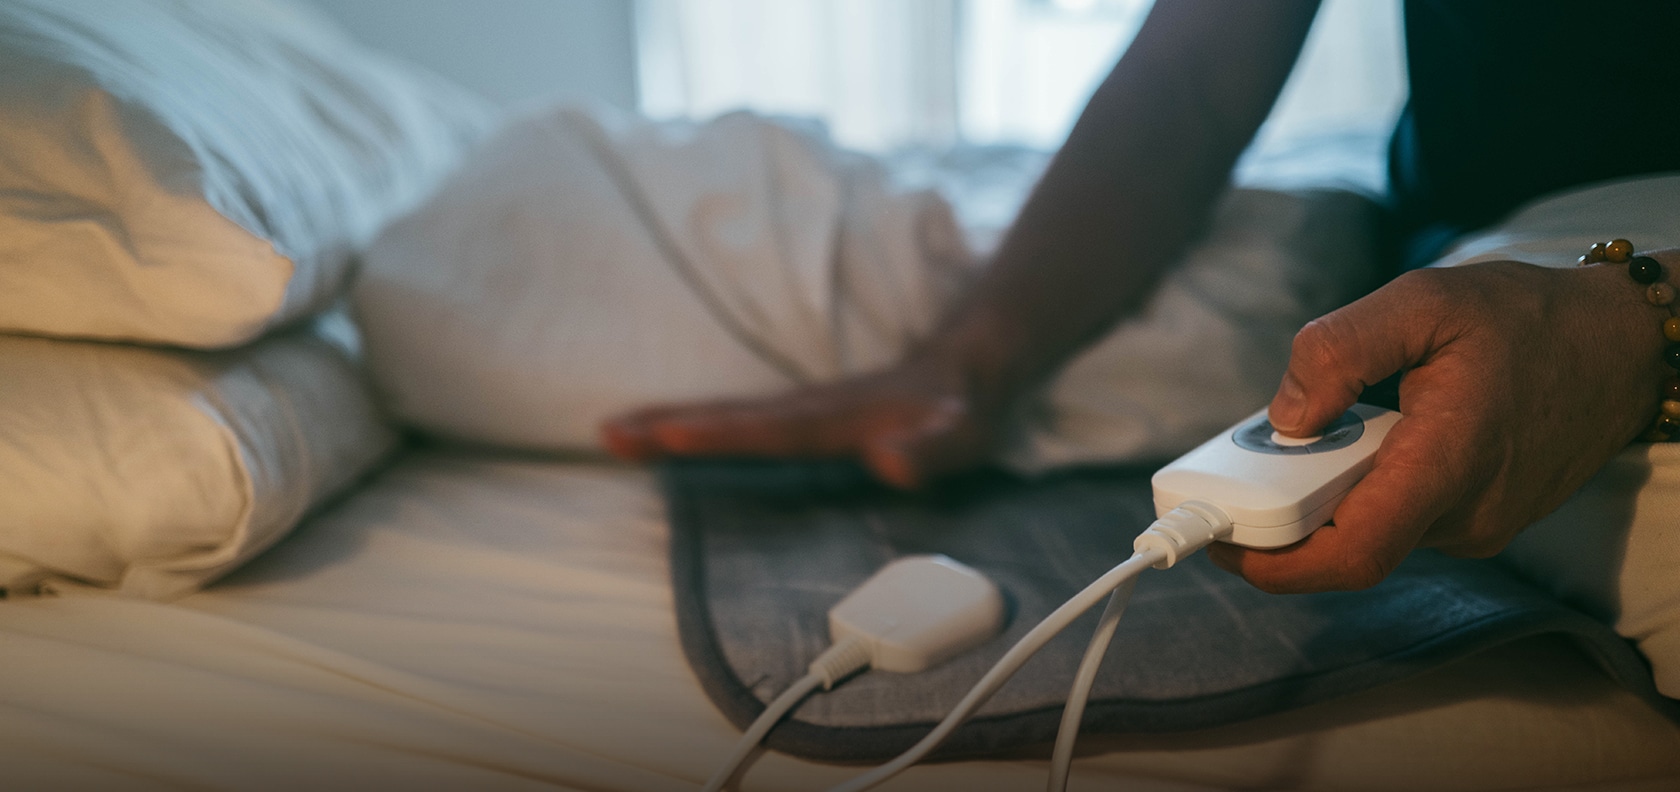 https://www.mapfreinsurance.com/media/Electric-Blanket-and-Heating-Pad-Safety_Blog-Feature.jpg